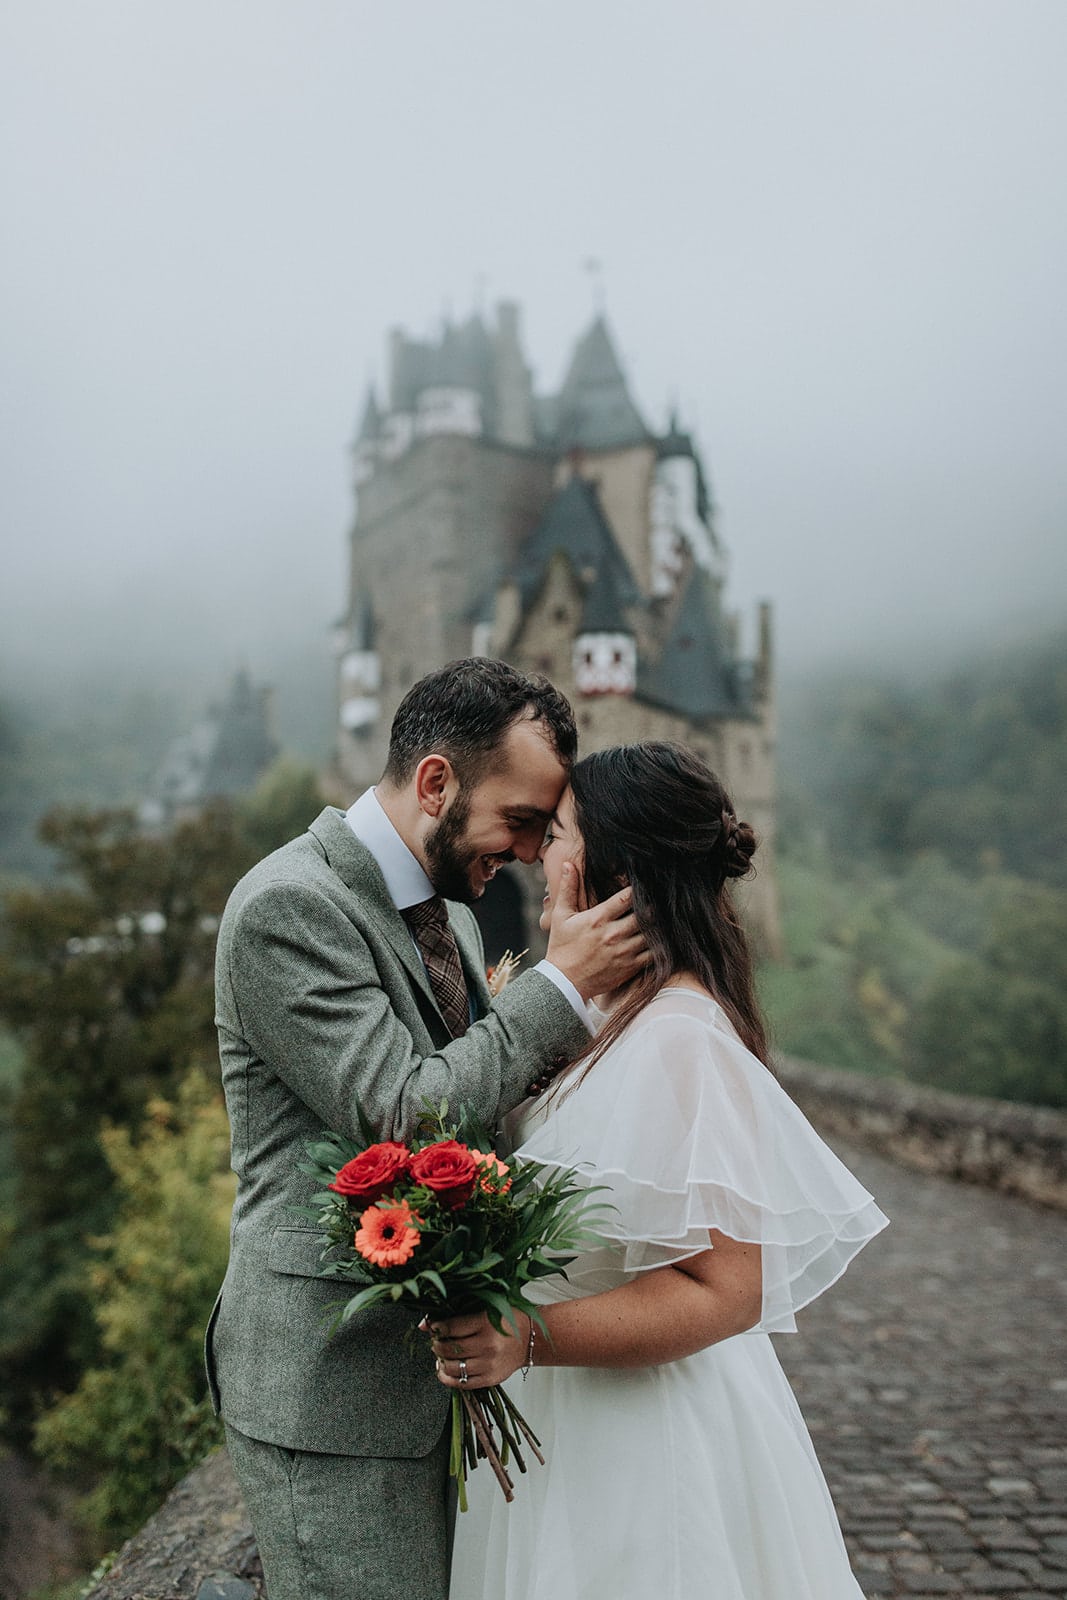 Brinde and groom embrace in the mist outside Burg Eltz Castle in Germany